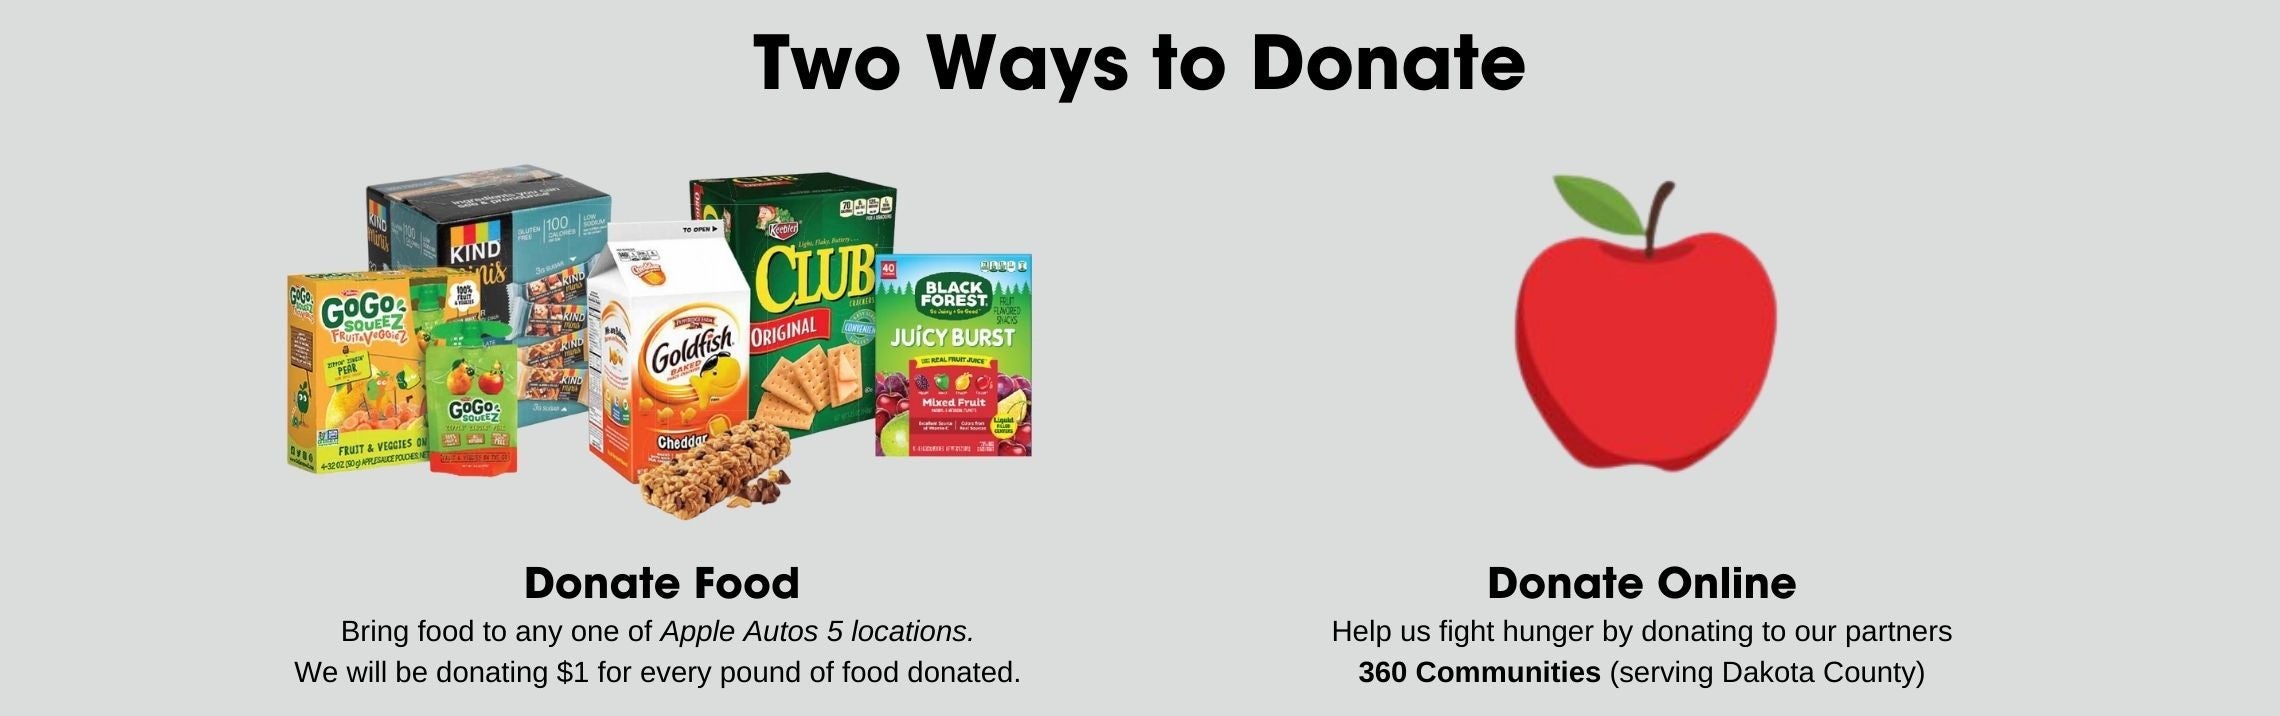 Two Ways to Donate